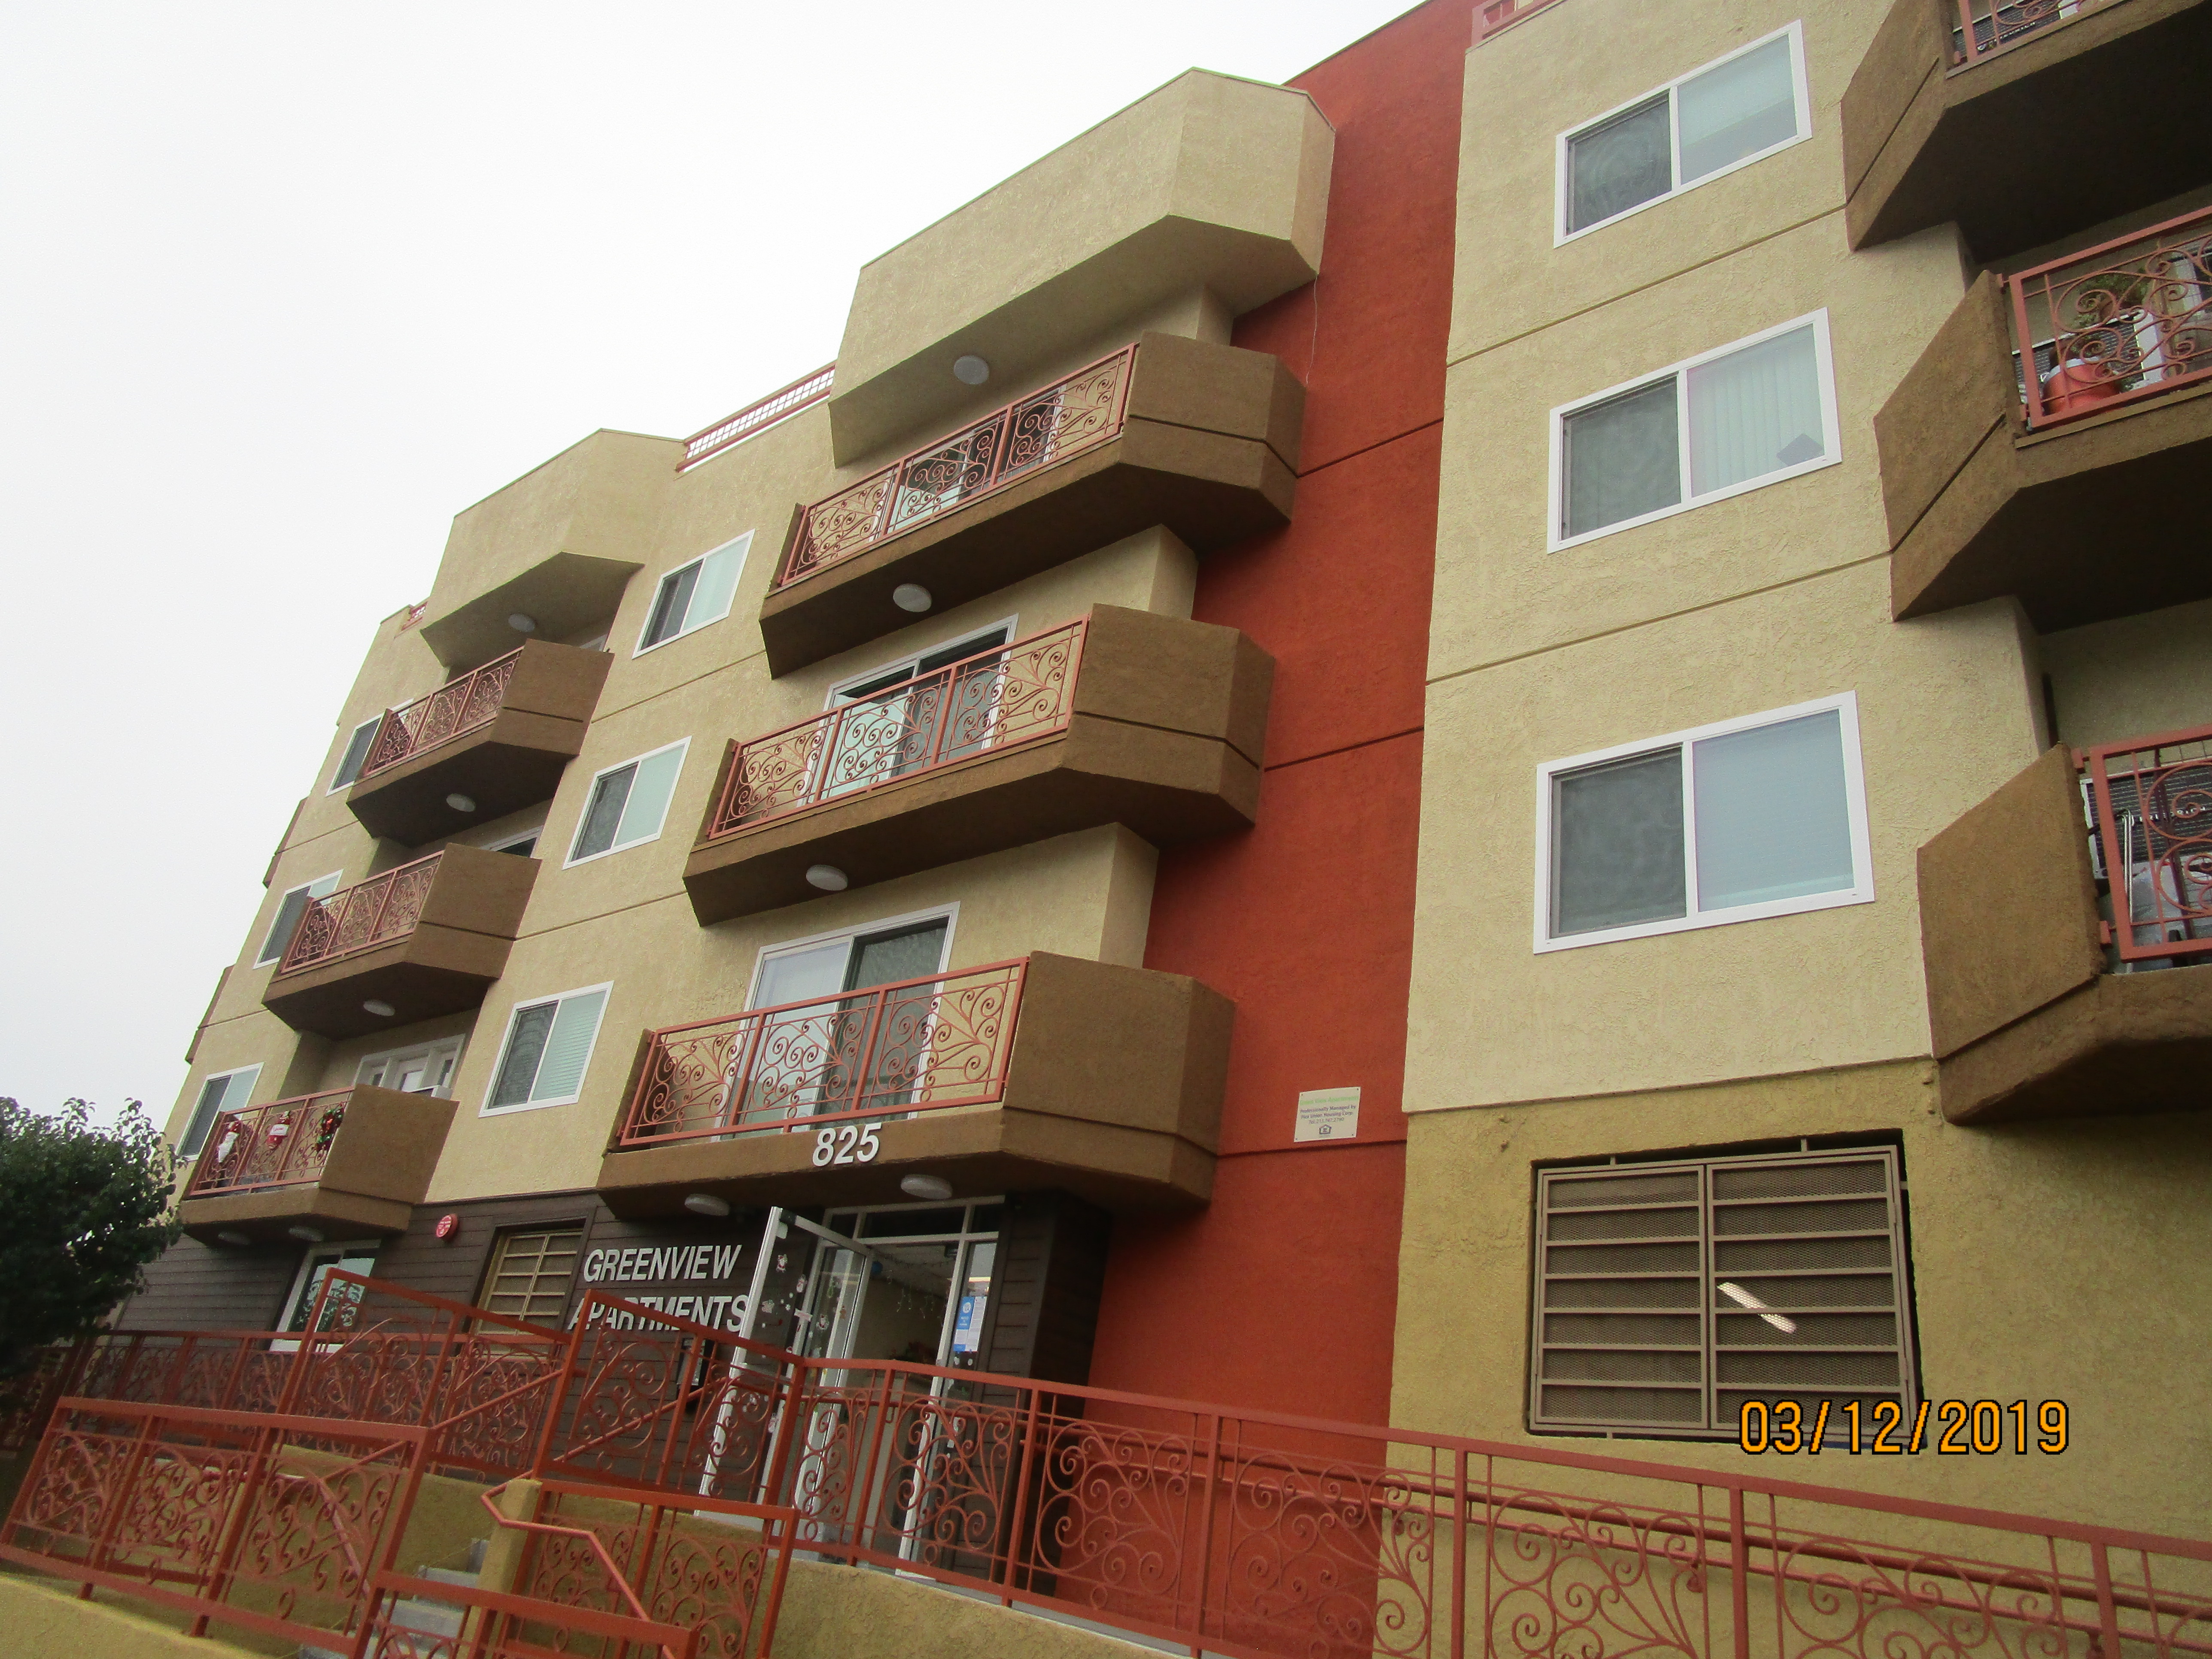 Right side view of a colorful four story building, multiple windows, some windows with balconies, orange metal hald way fence with handrails, steps and a ramp.